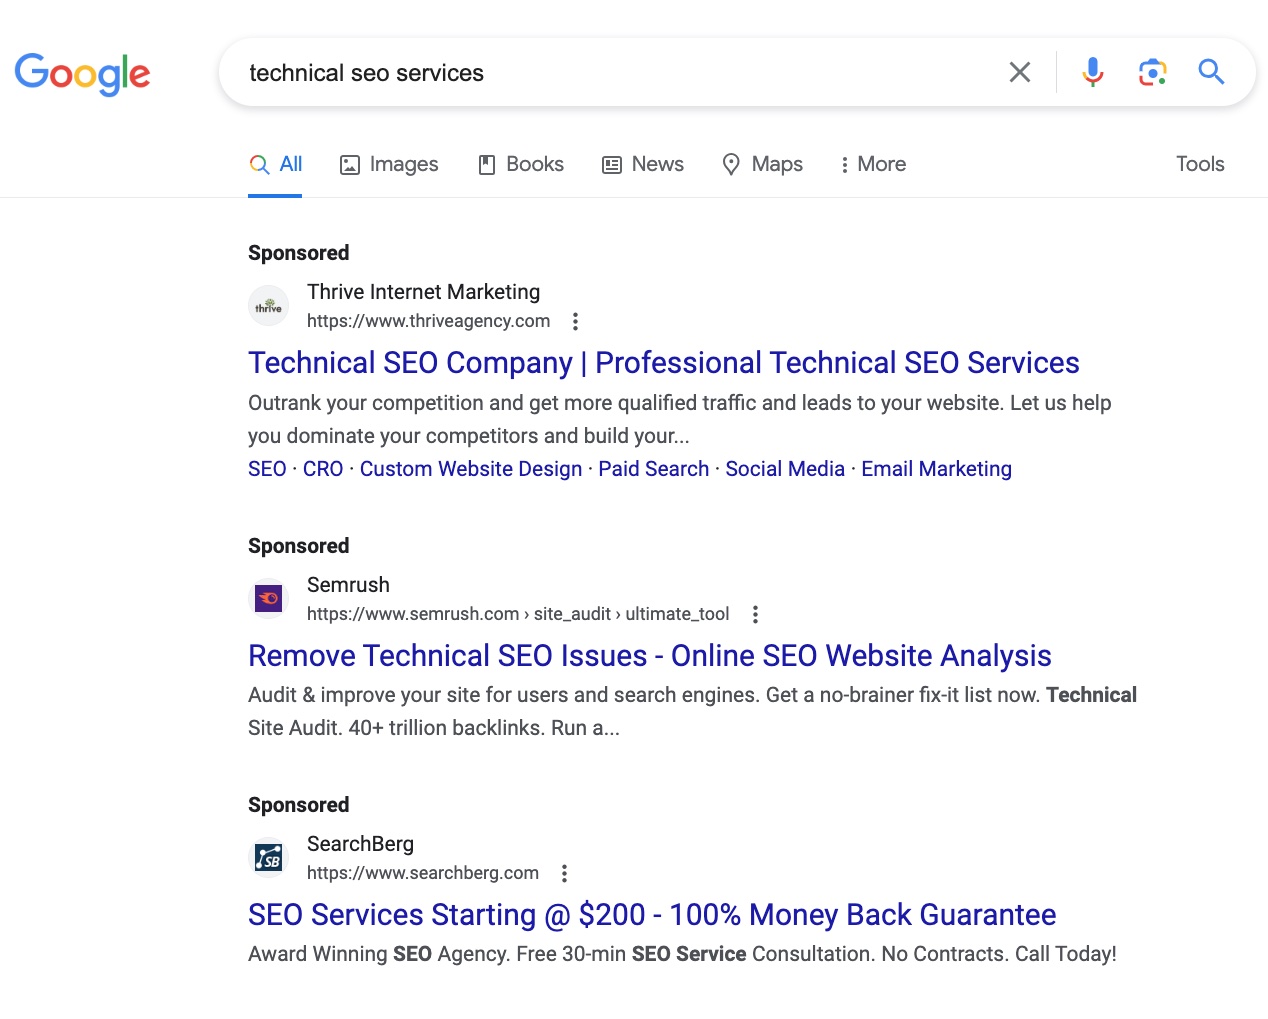 PPC ads on Google's SERP for the "technical seo services" query